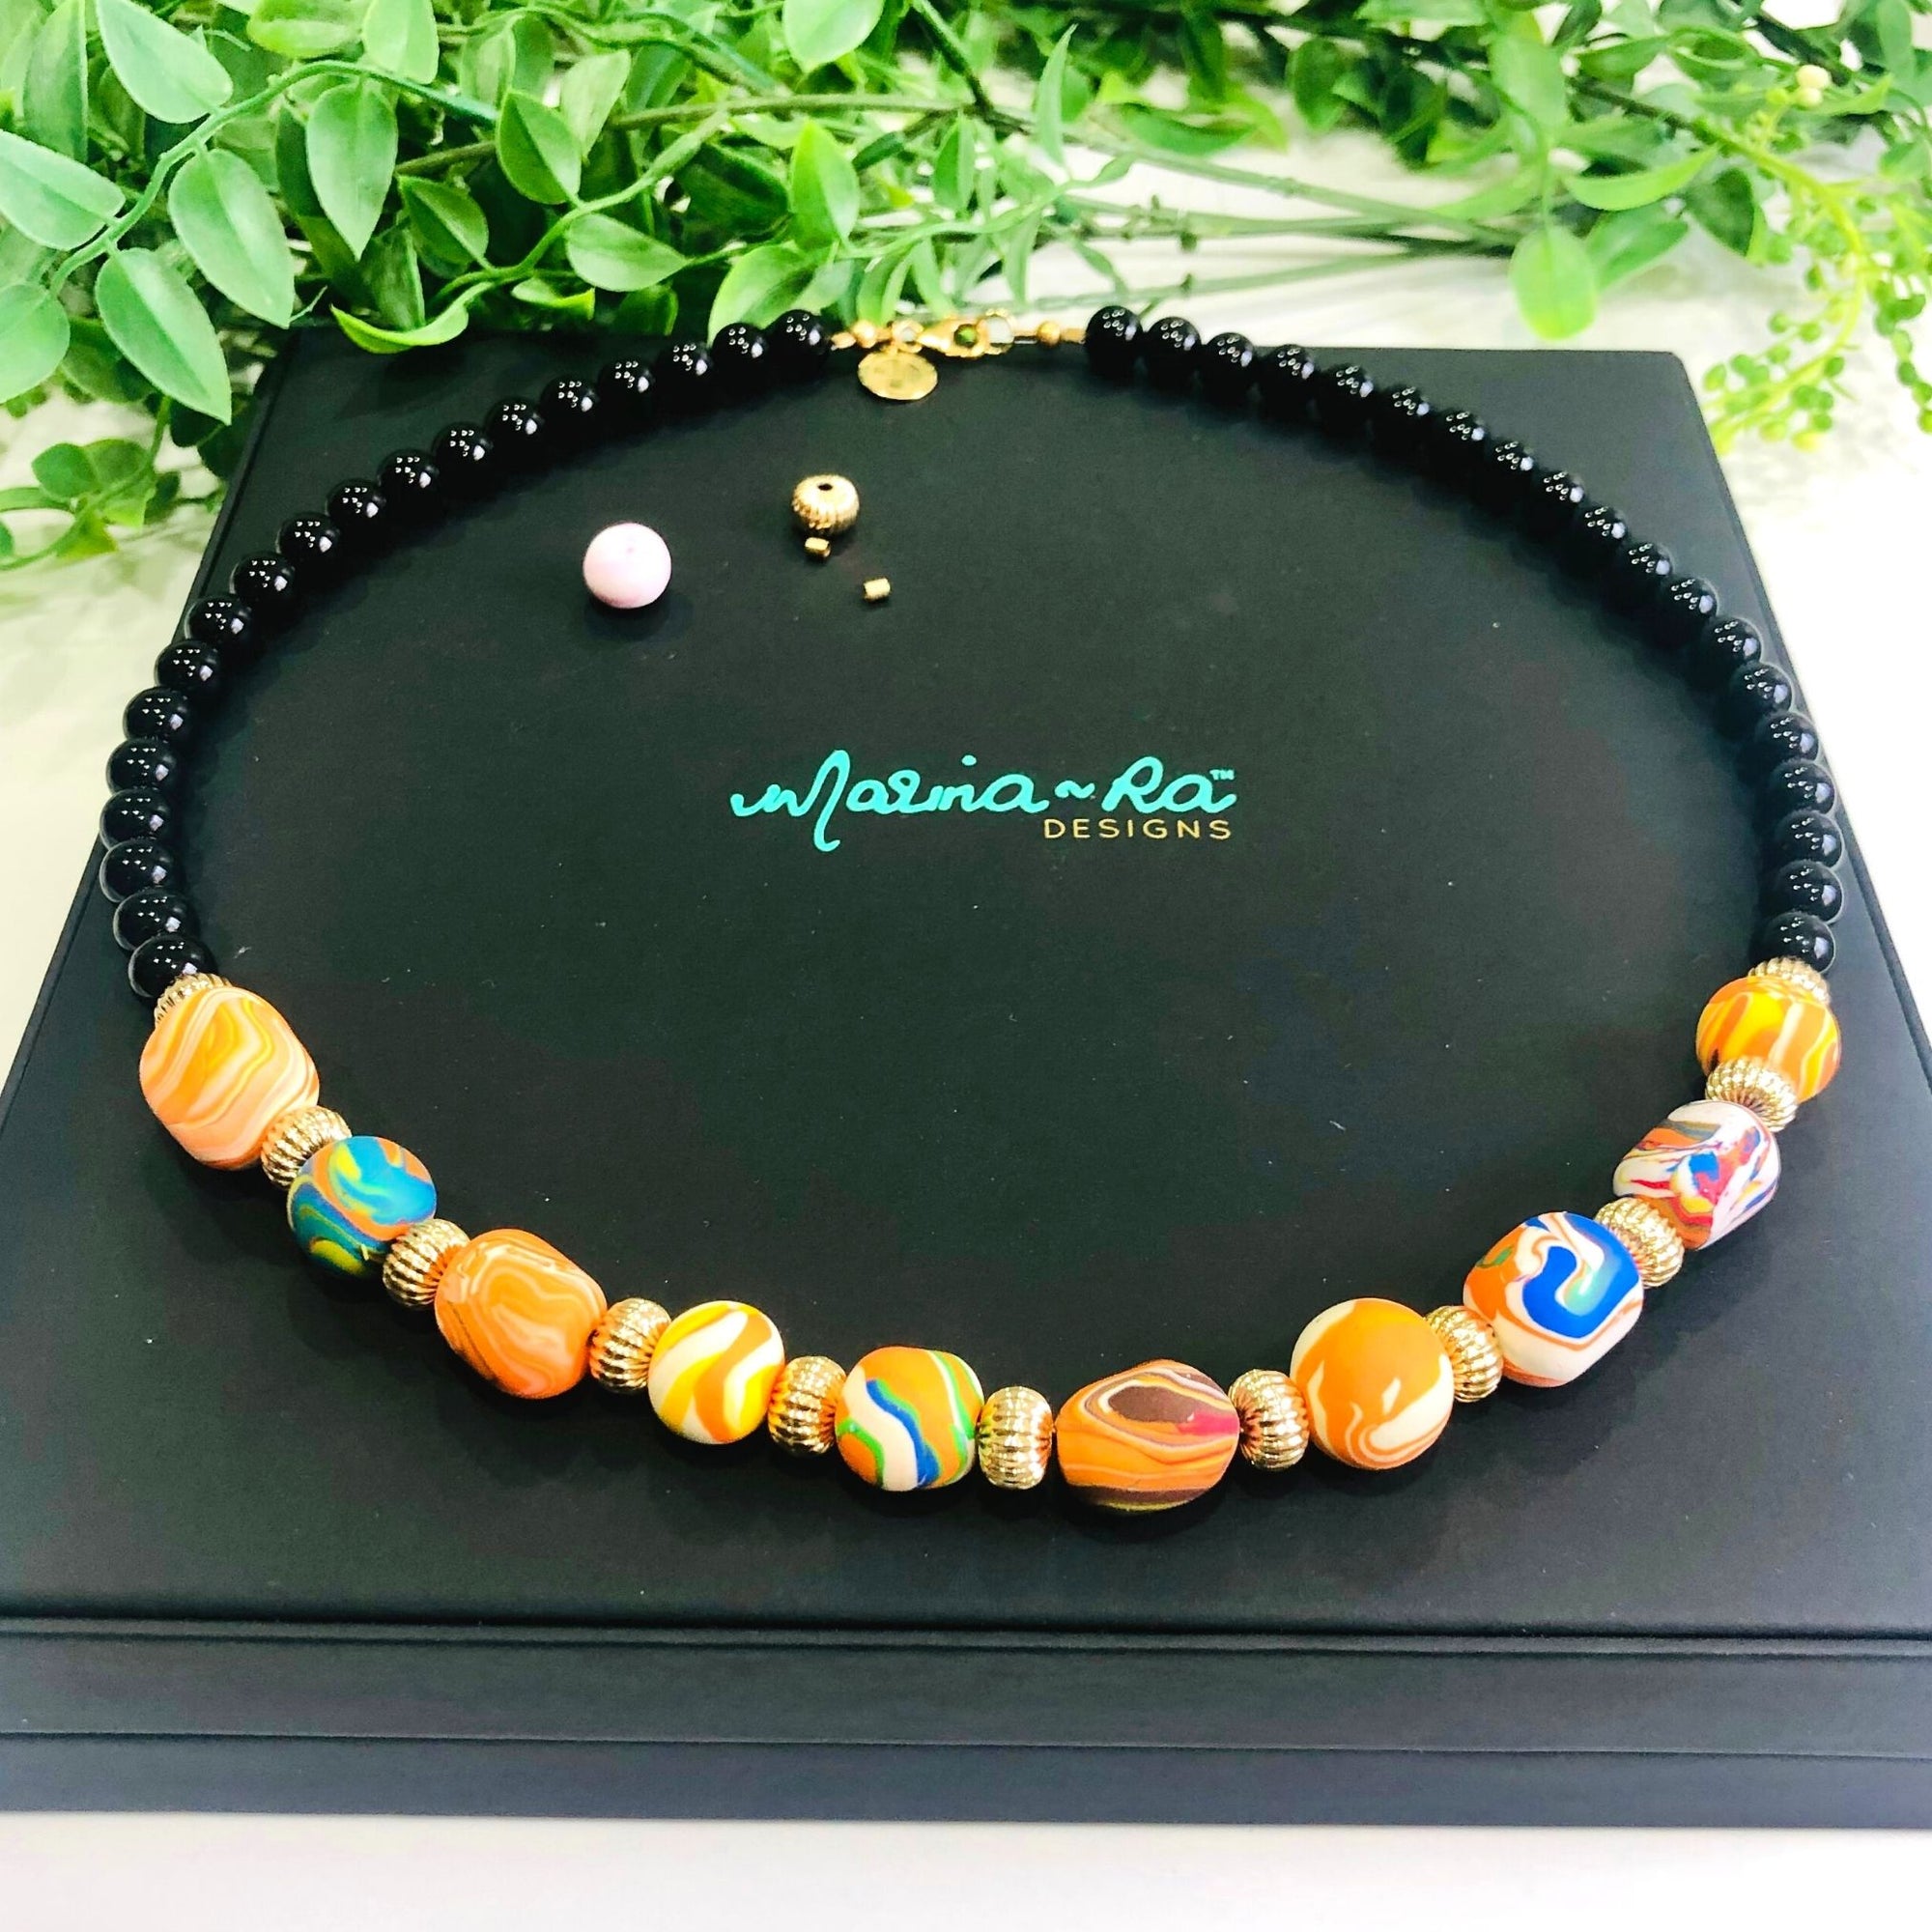 Handmade Beads, black onyx, quality  gold filled findings and Marina-ra insignia.  Beautiful Luxurious Packaging. Hand Assembled. Unique Gift.  Stunning Necklace. Orange, white, blue beads.  Trademark